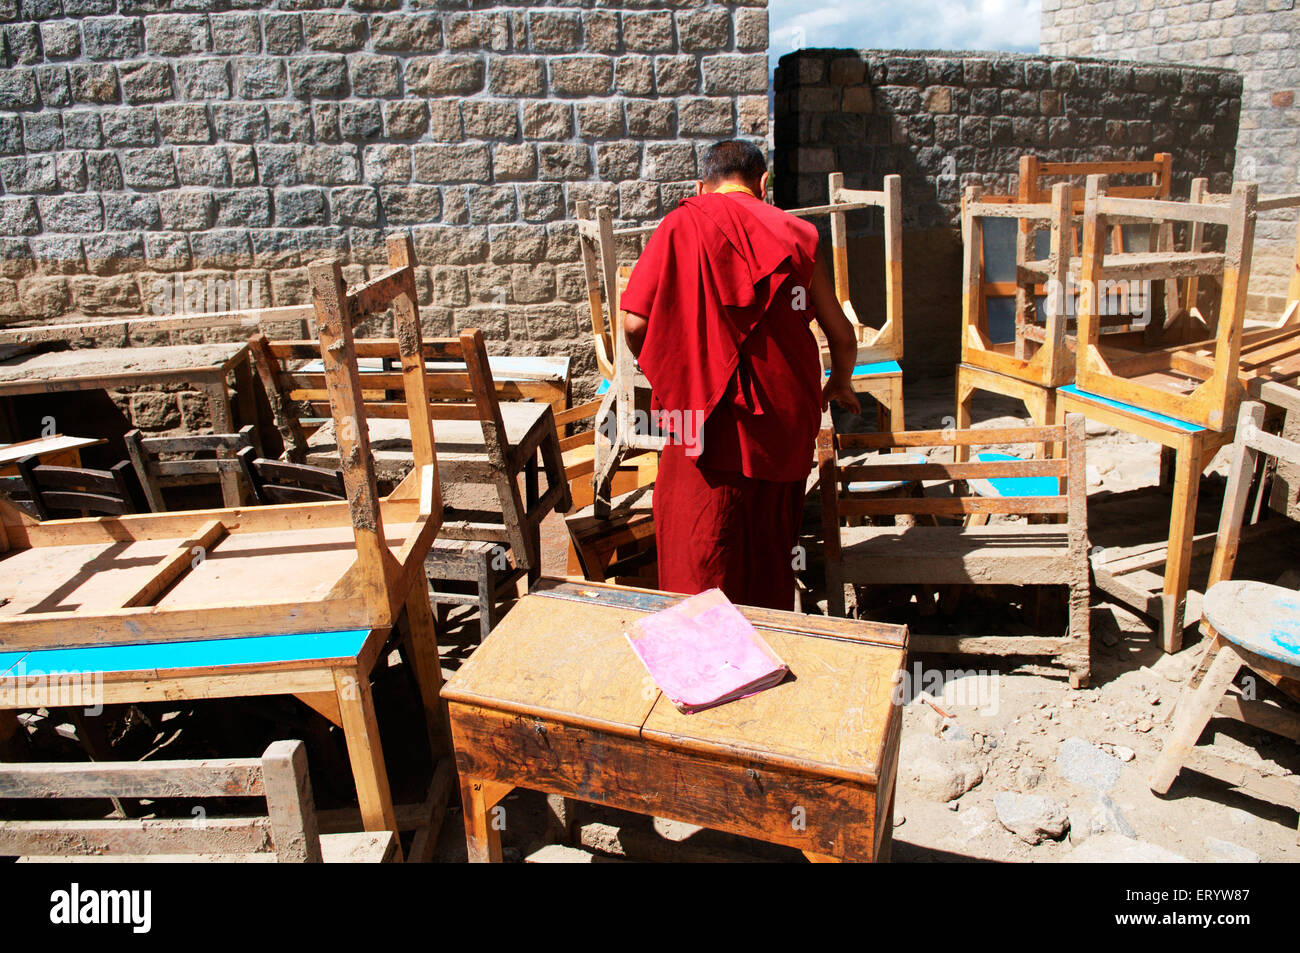 Monk searching books in damaged dpk institute due to flashflood in leh ; Ladakh ; Jammu and Kashmir ; India Stock Photo